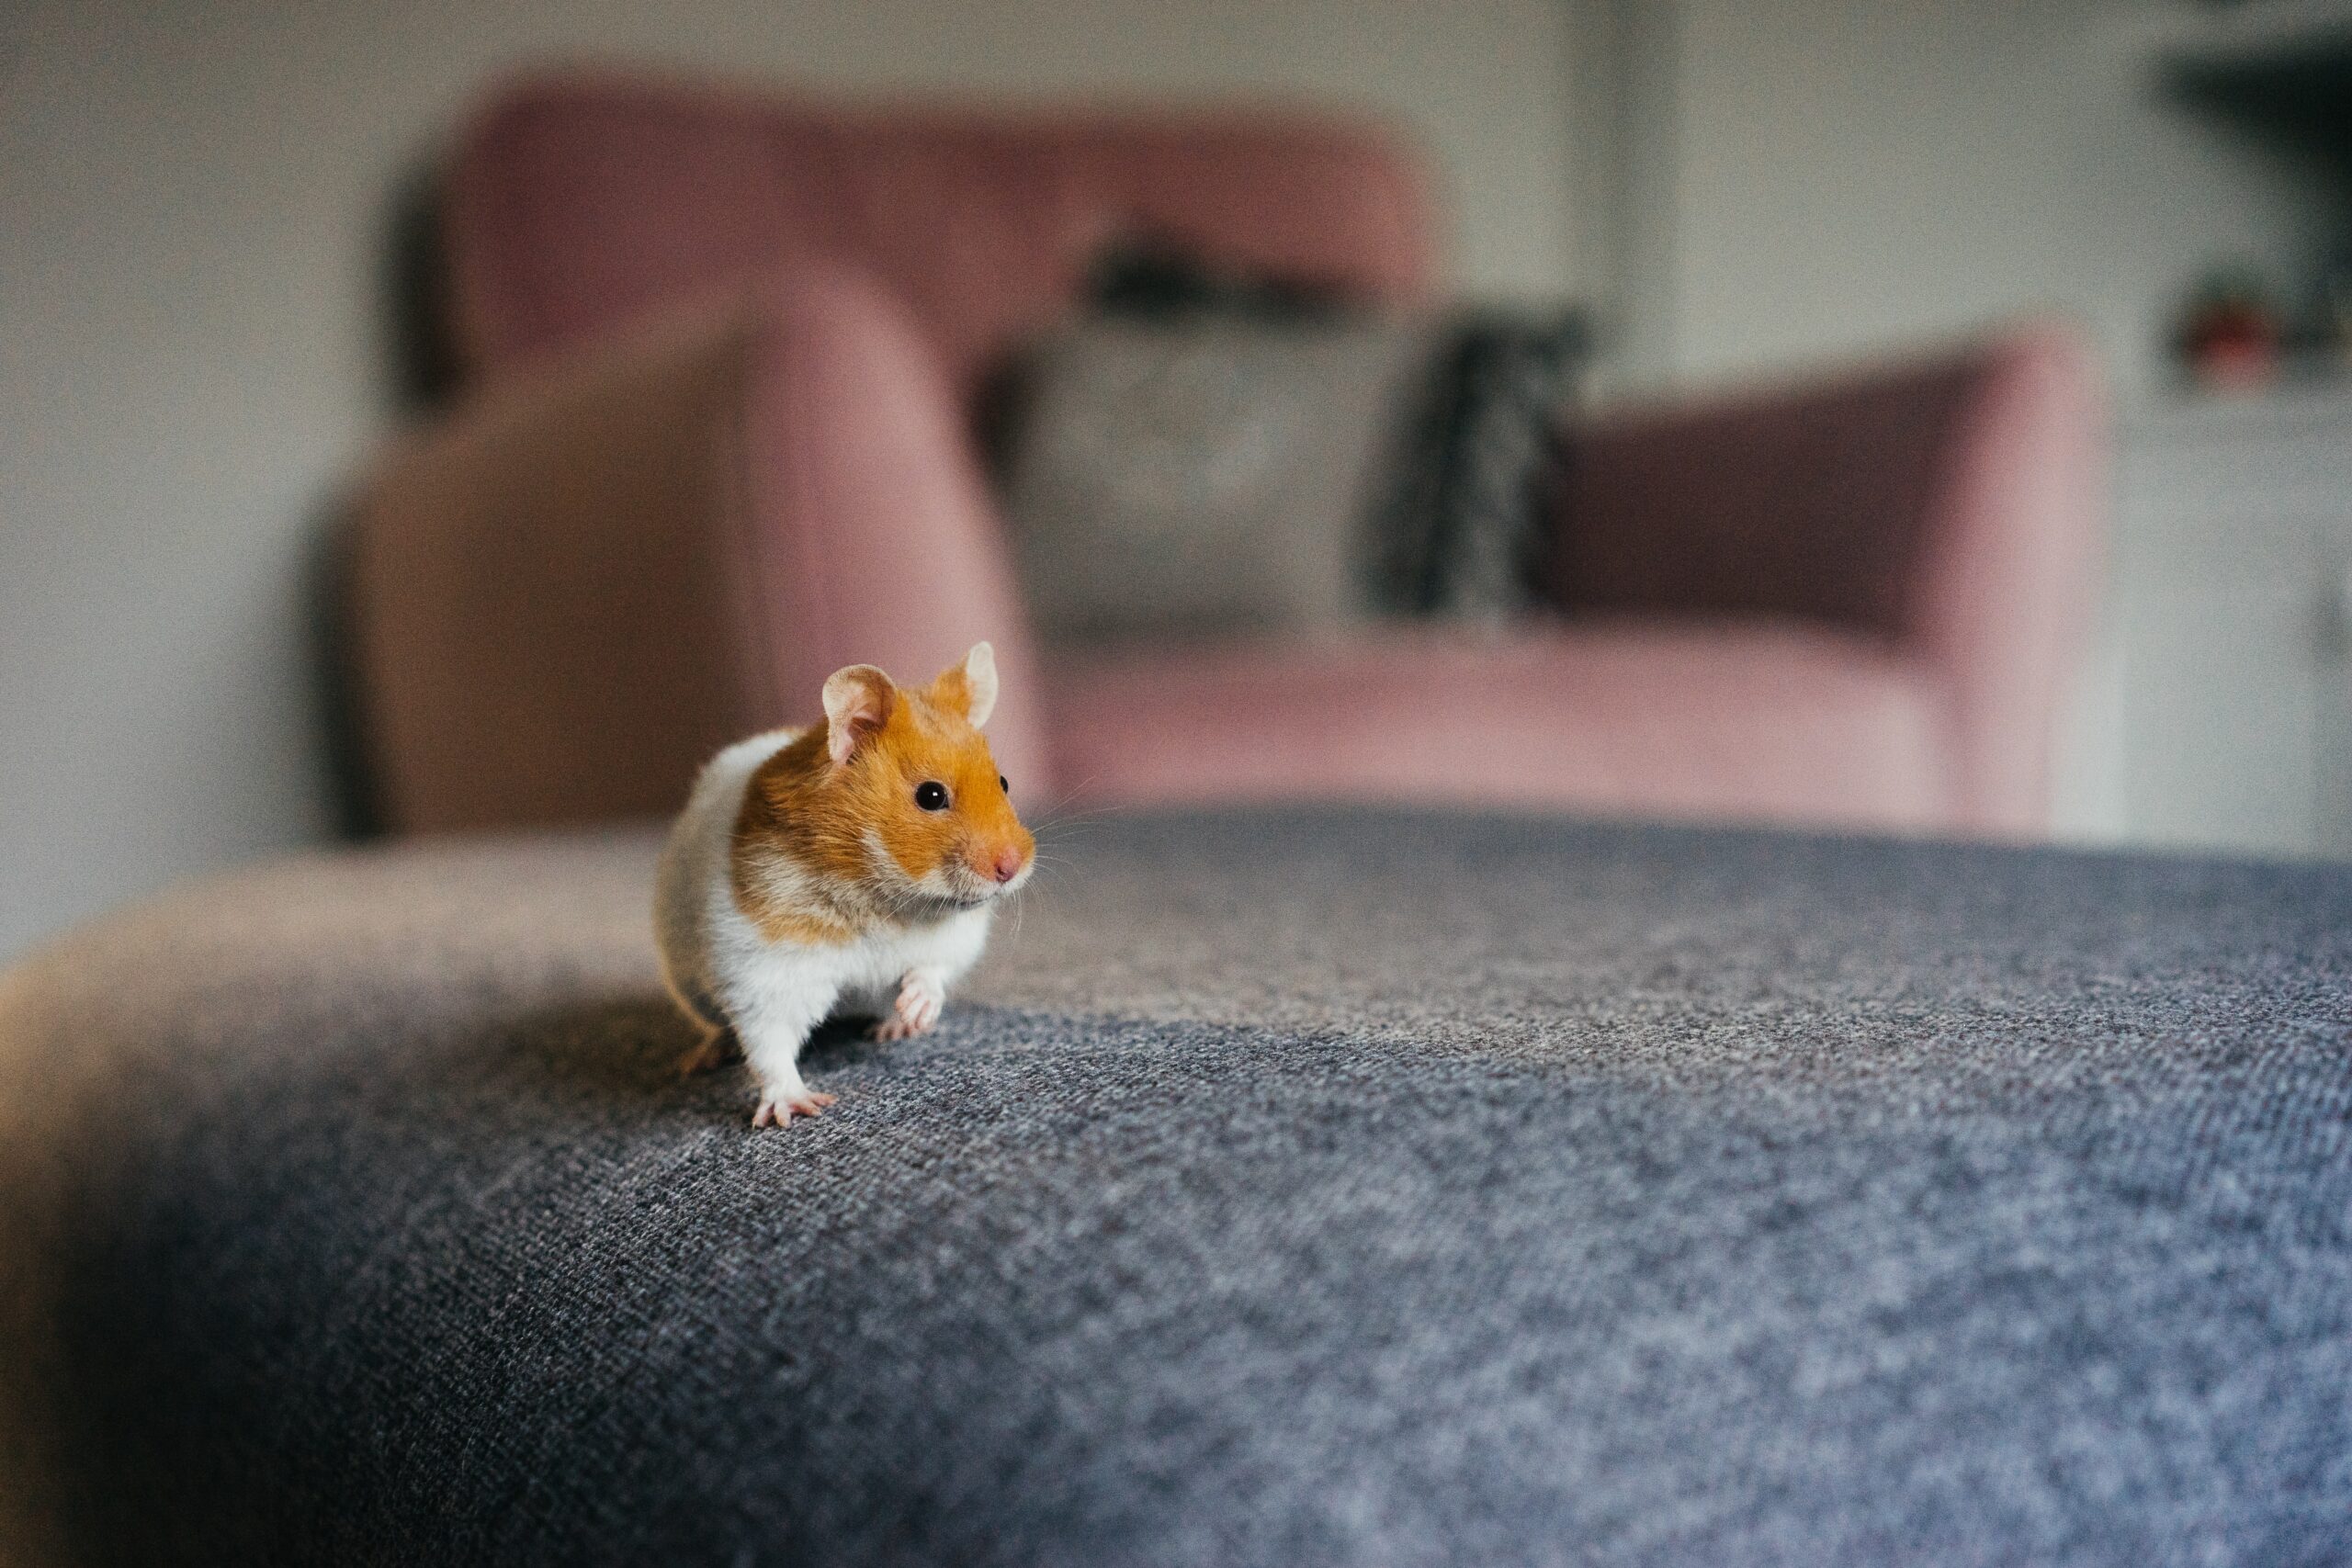 How can you tell how old your hamster is?